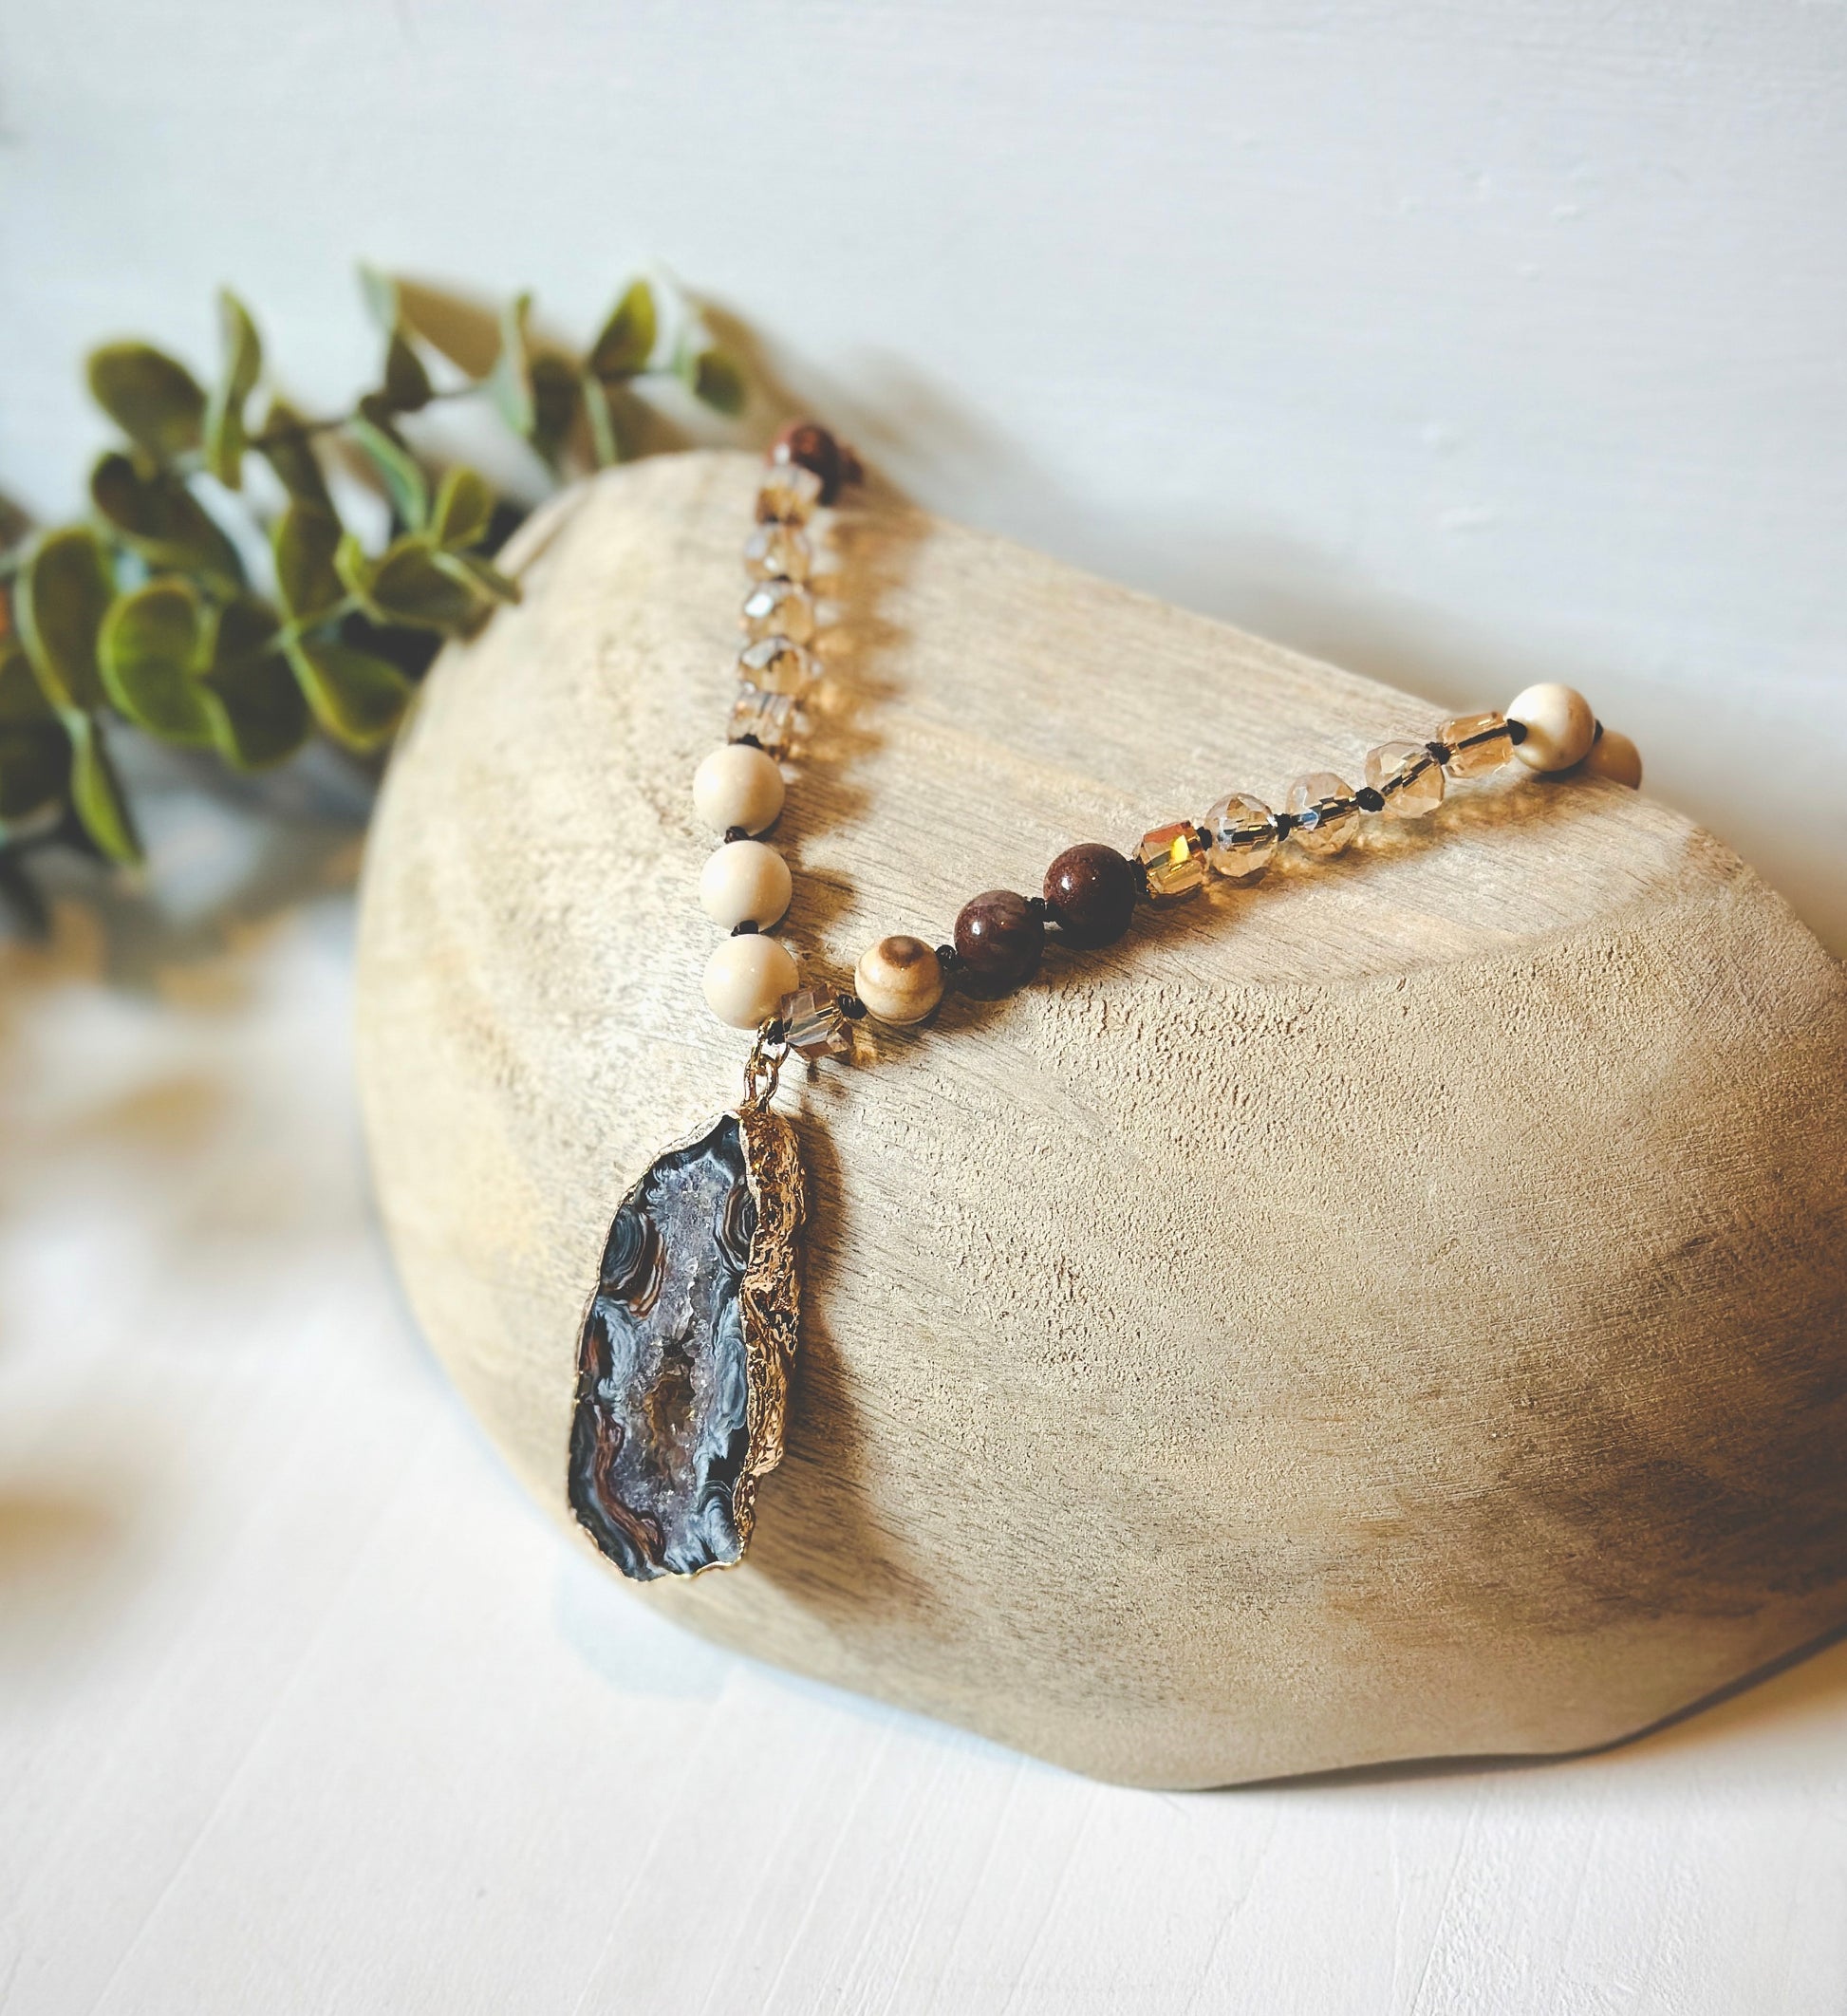 gemstone mala necklace with druzy agate geode pendant 